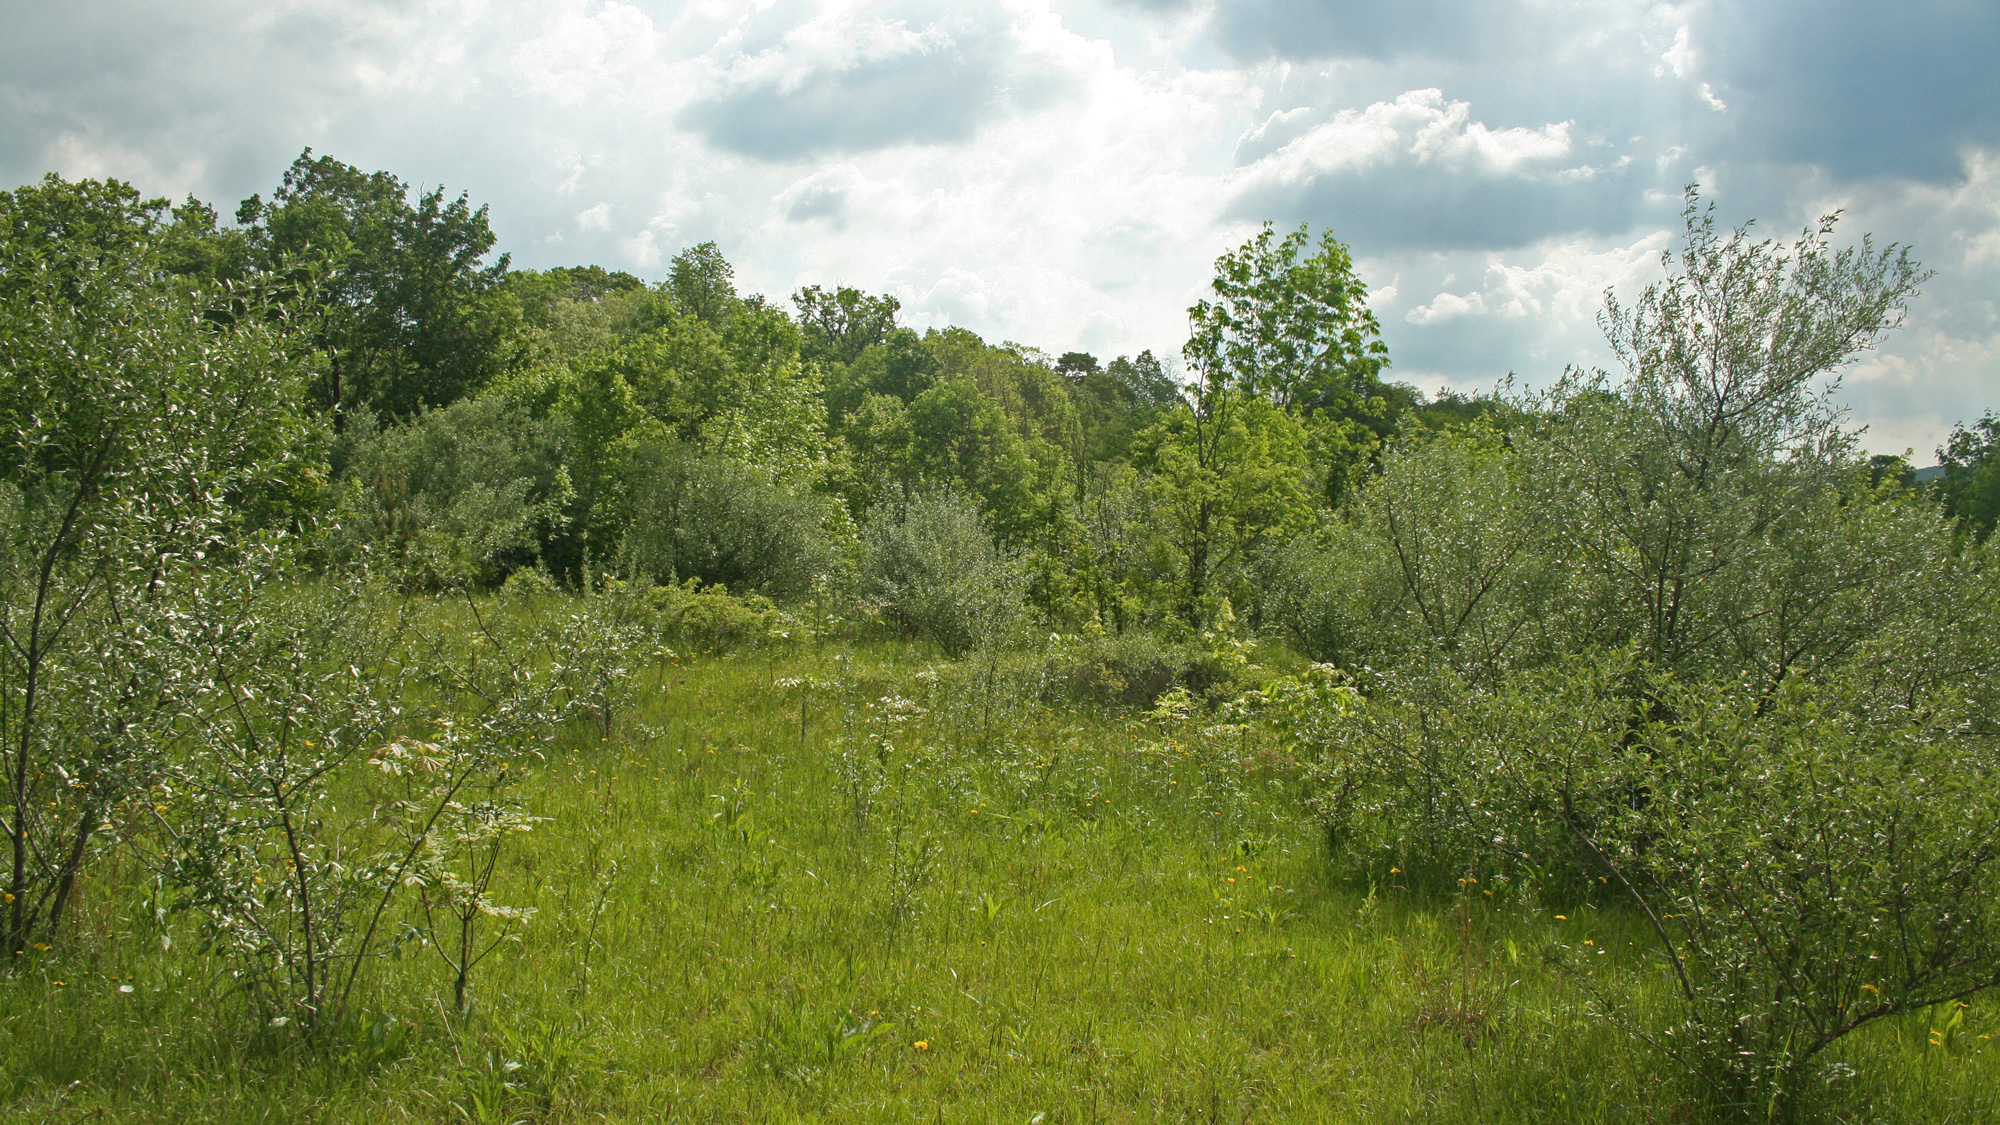 Young forest habitat in western Maryland. Photo © Matt Tillett / Flickr through a Creative Commons license